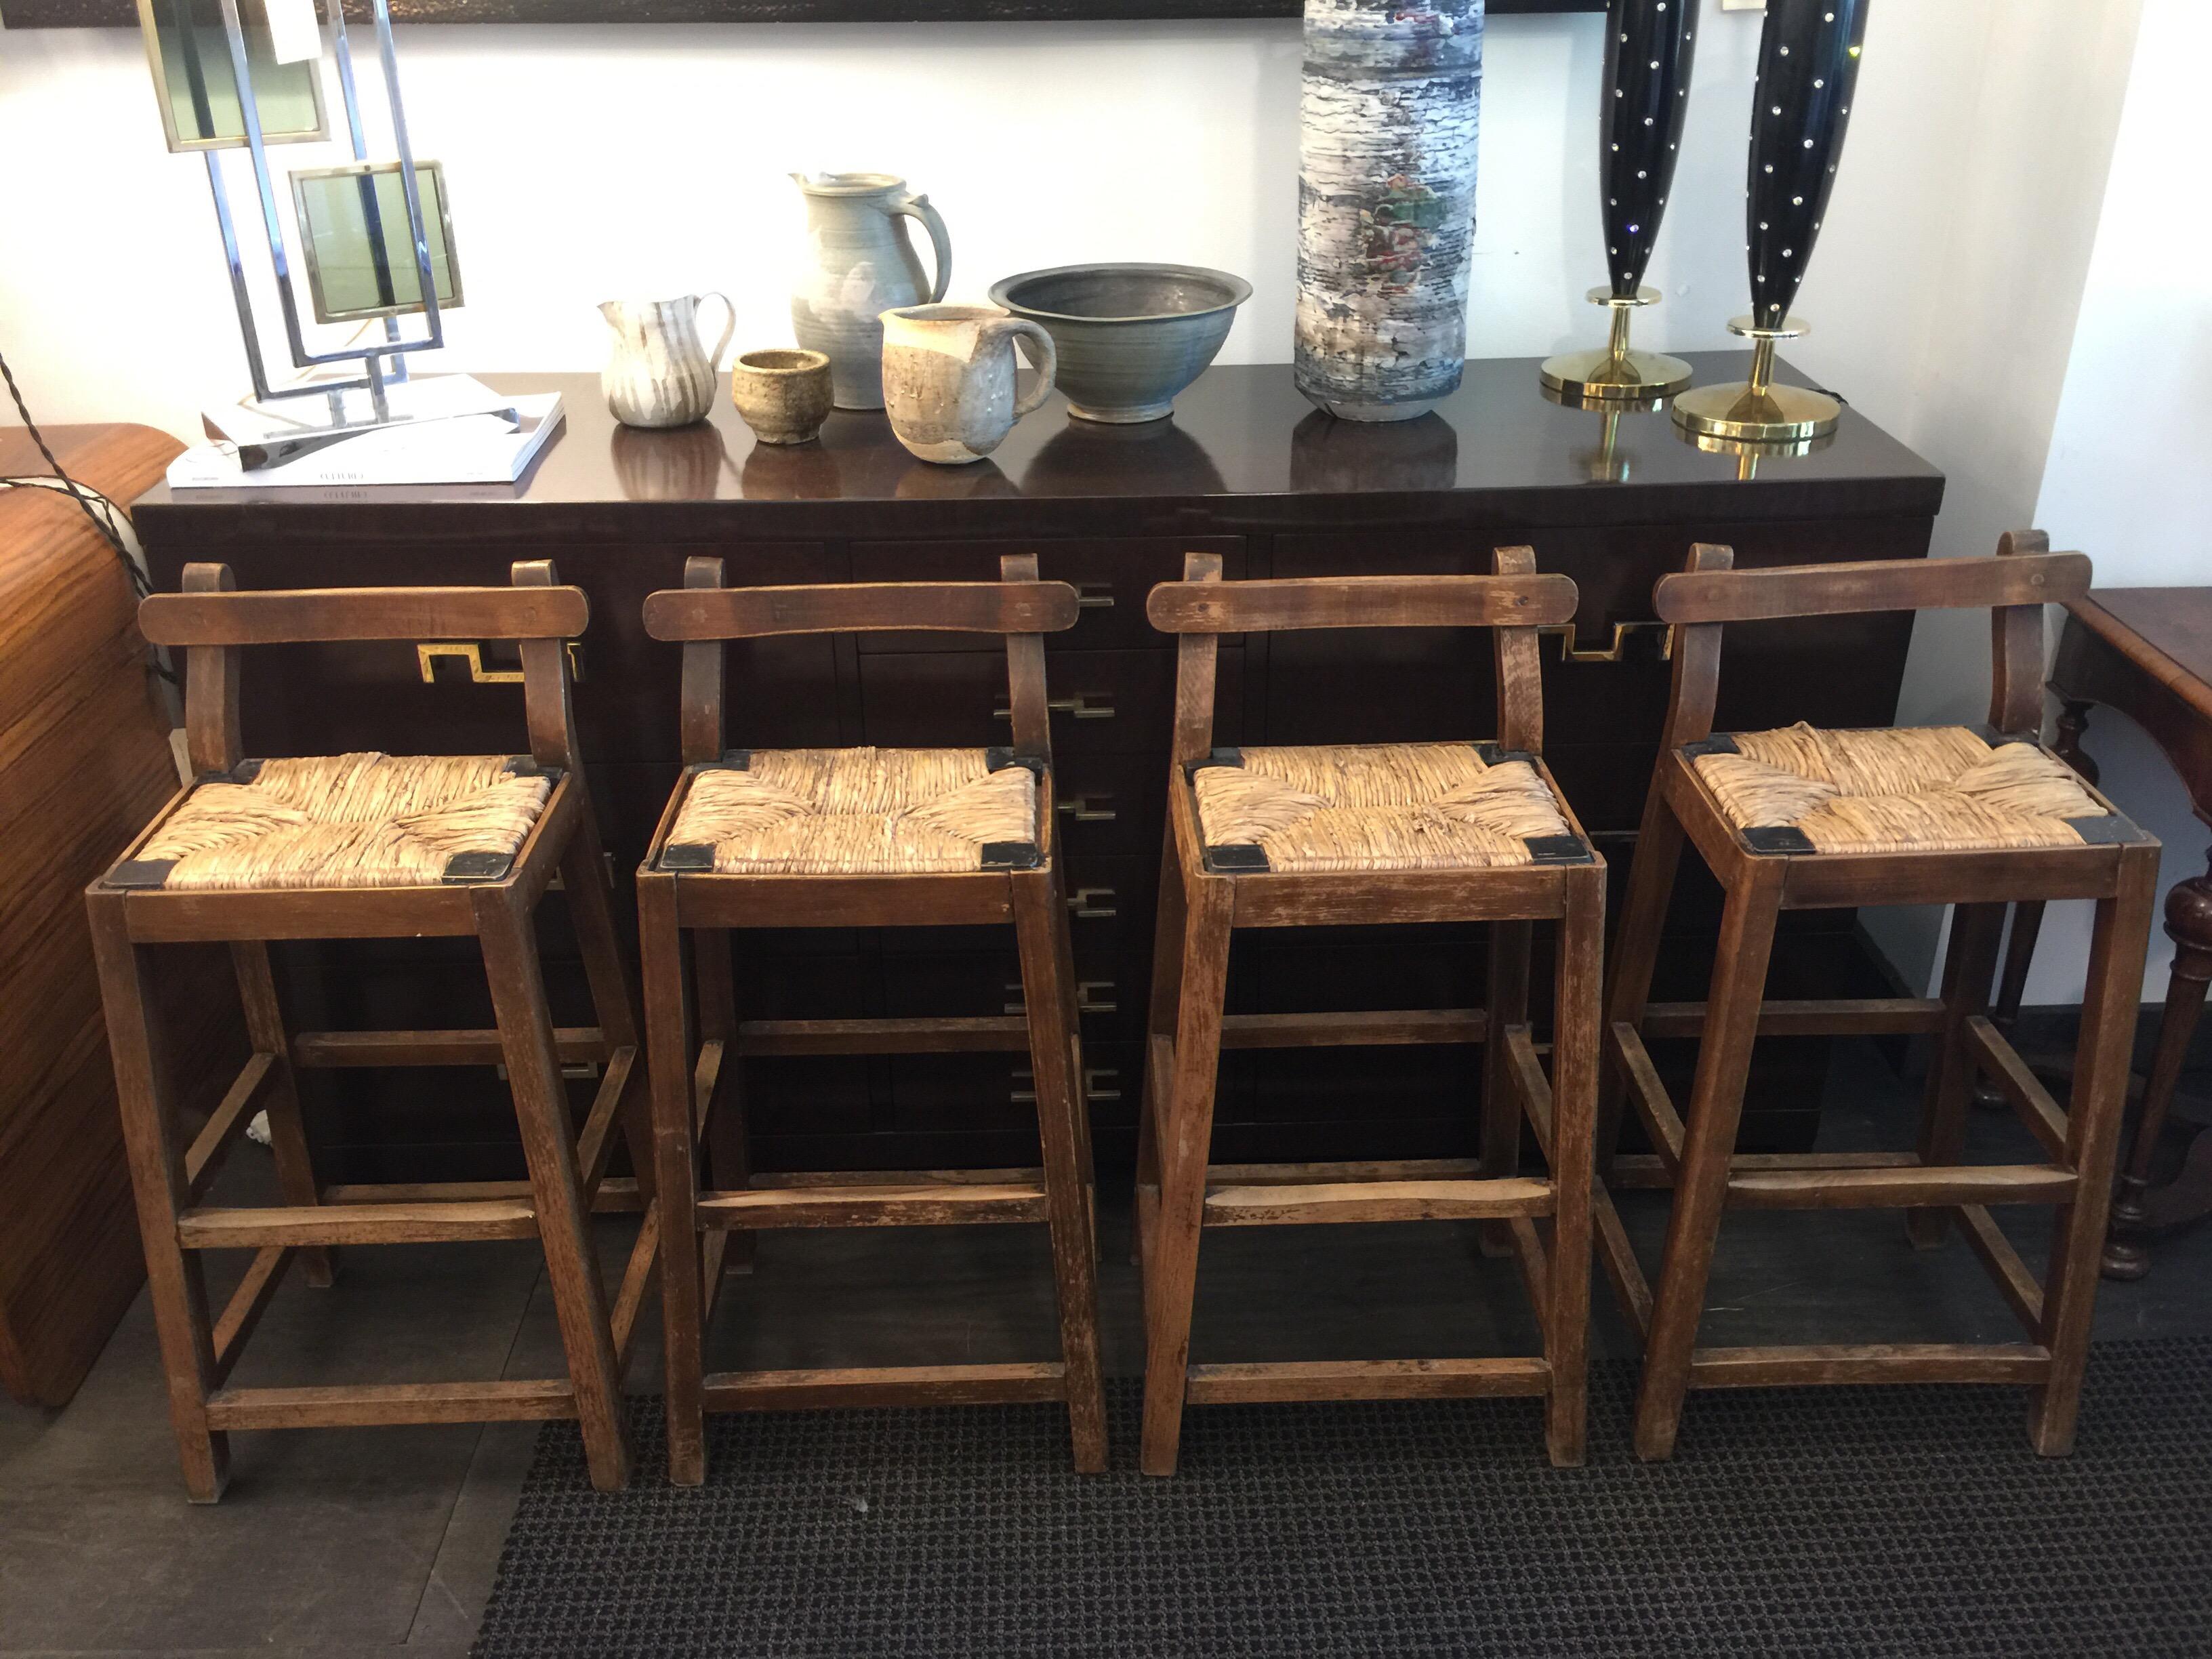 These are small in scale bar stools, more like accent seating. Beautiful wear and distress on these primitive style items. Seats are woven rush - all in nice original condition. Very sturdy for their size and desirable for a rustic environment.